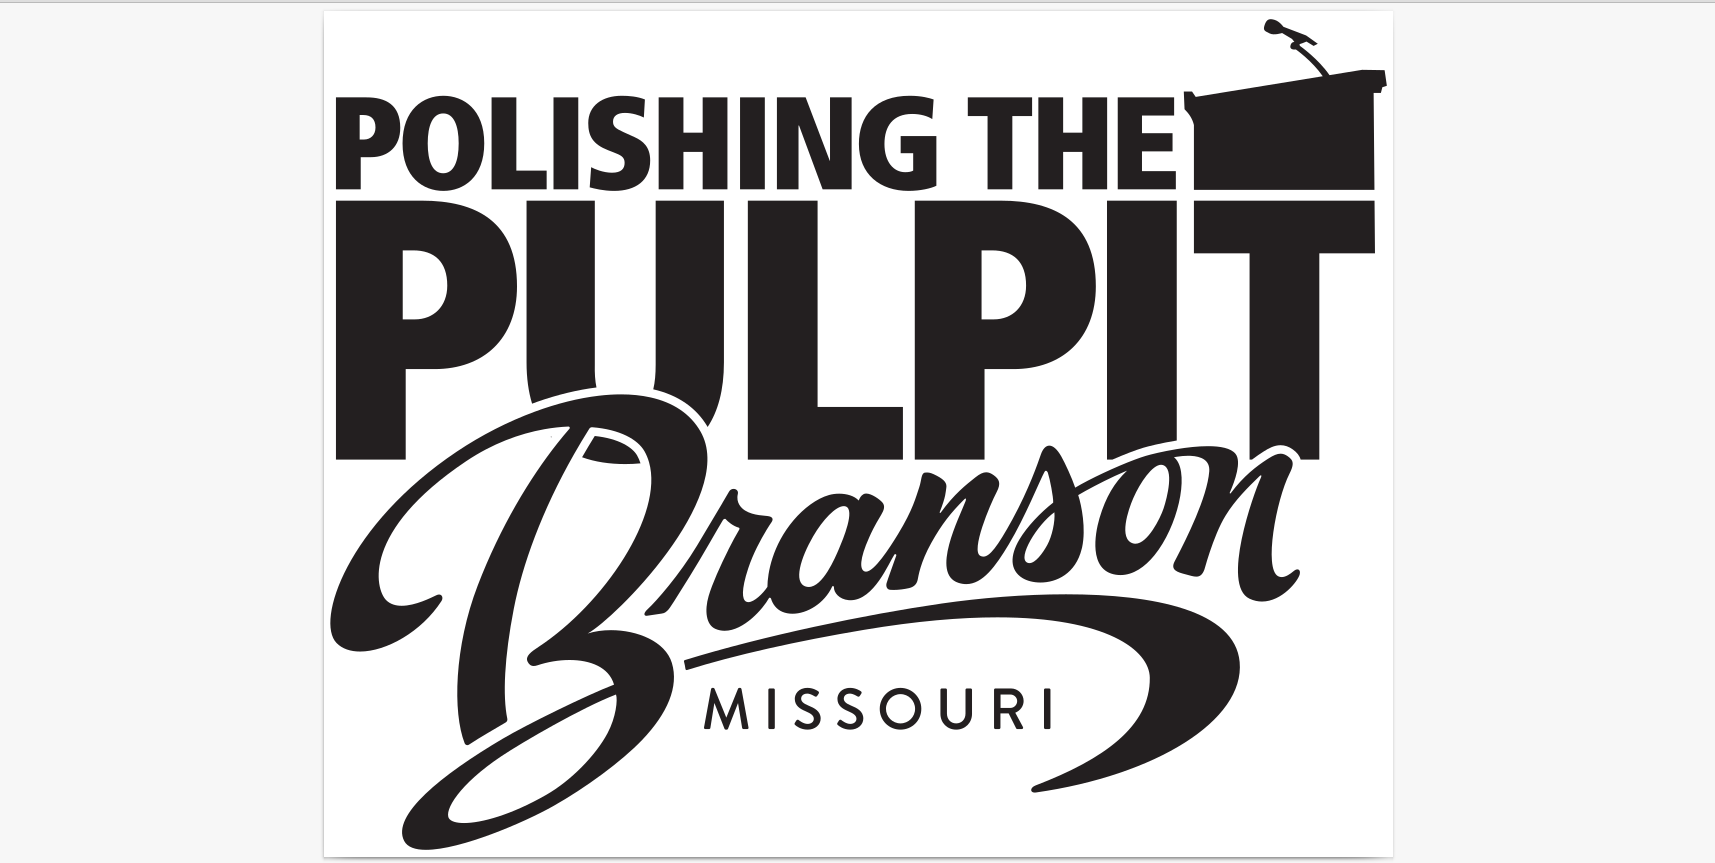 Polishing the Pulpit event expands to Branson MO